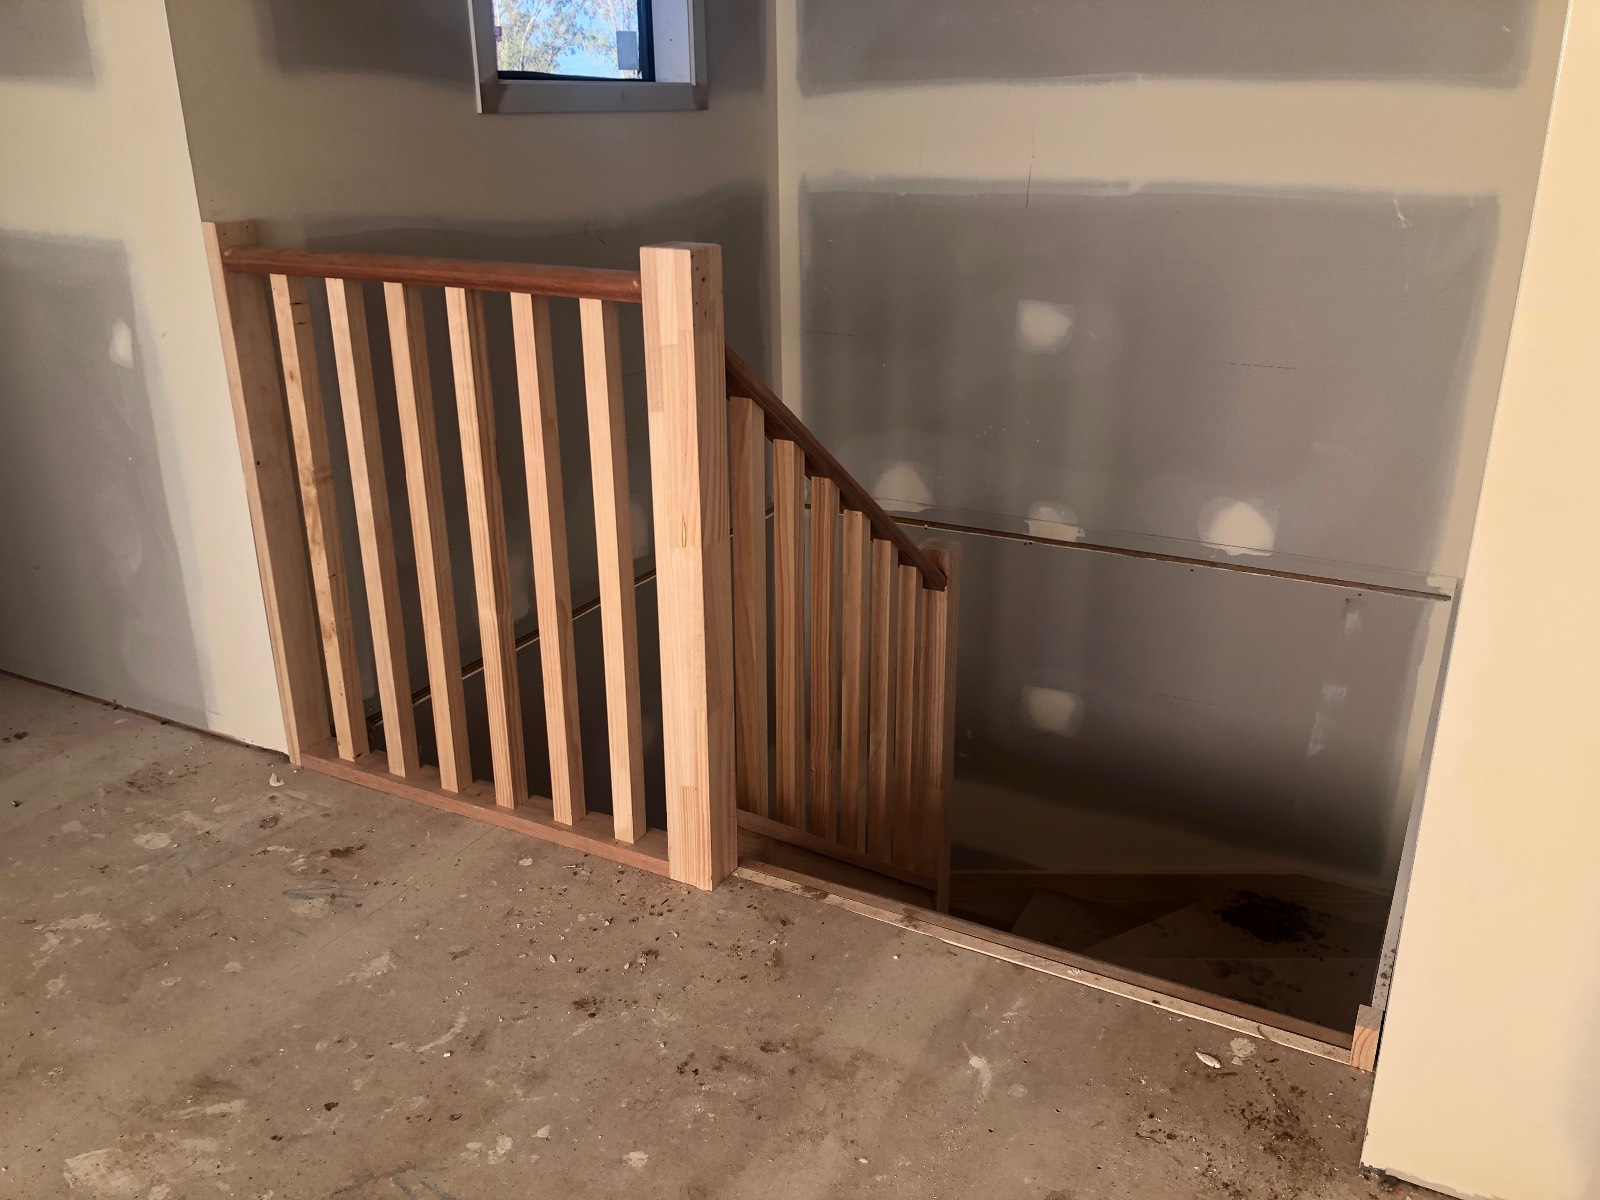 Is it possible to stain or paint standard builders MDF stair